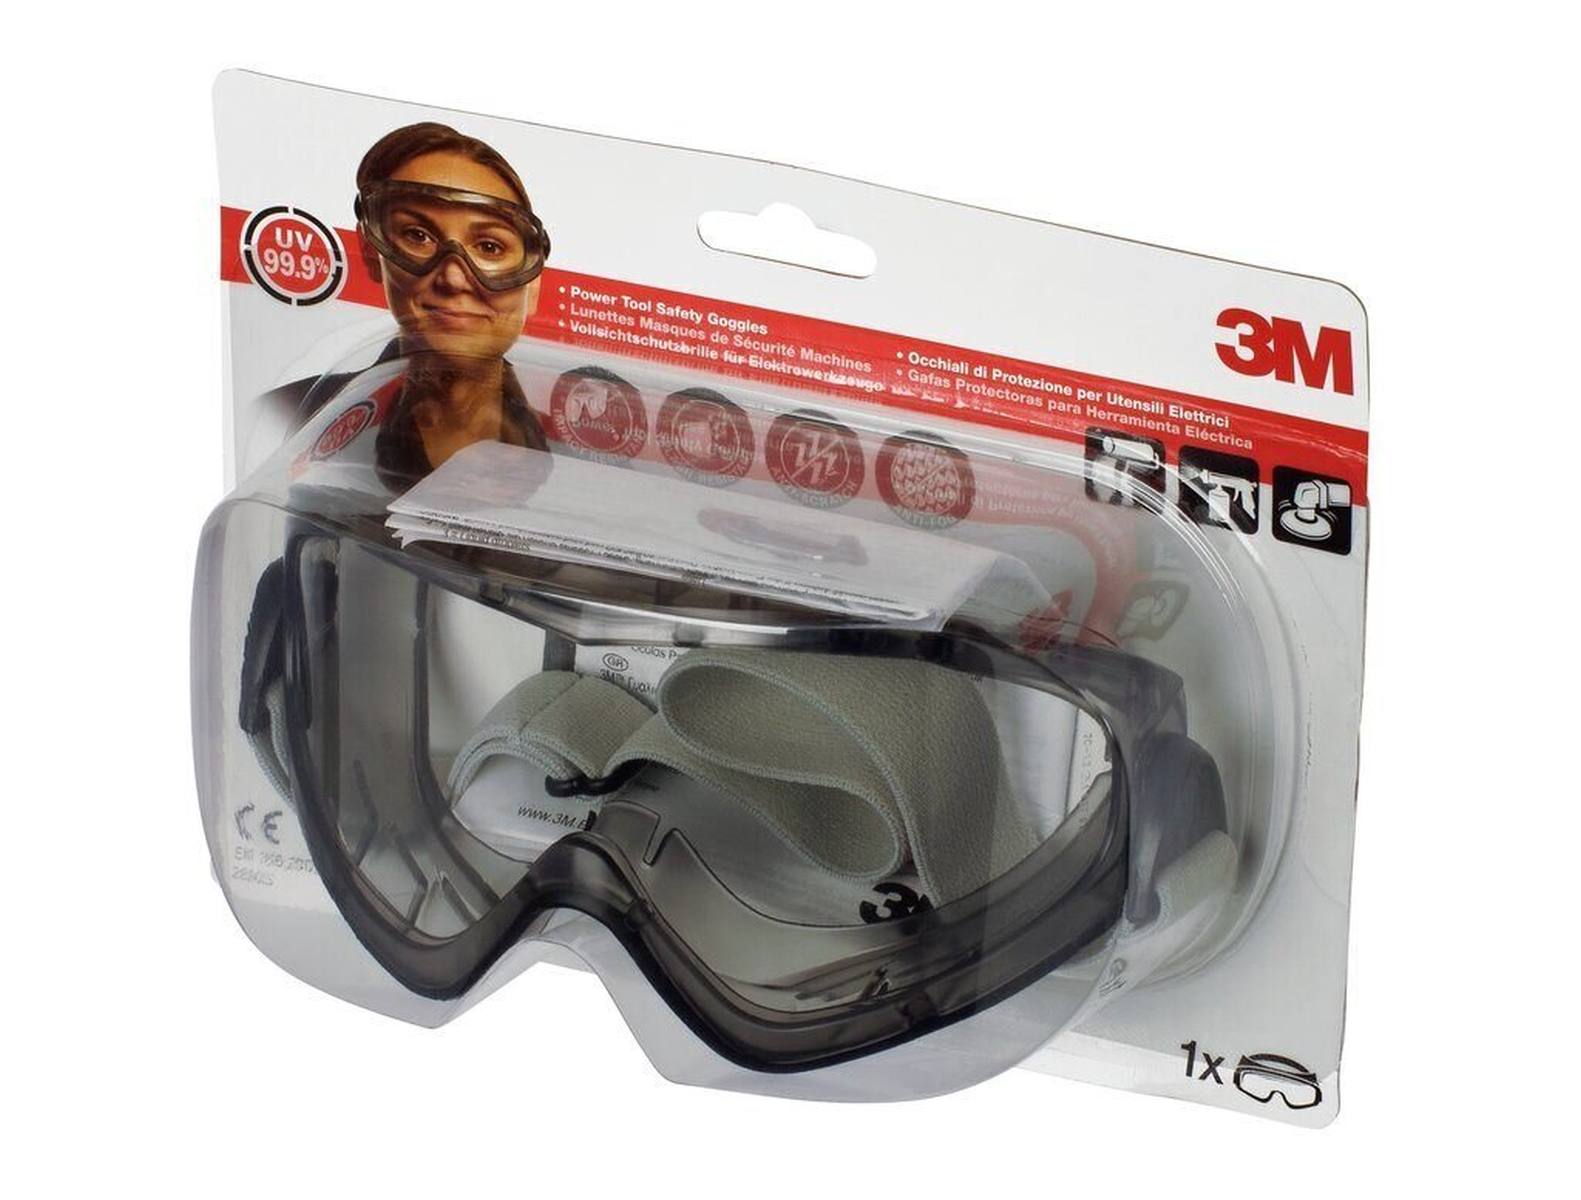 3M Full-vision safety spectacles 2890SC, 1 piece, blister pack